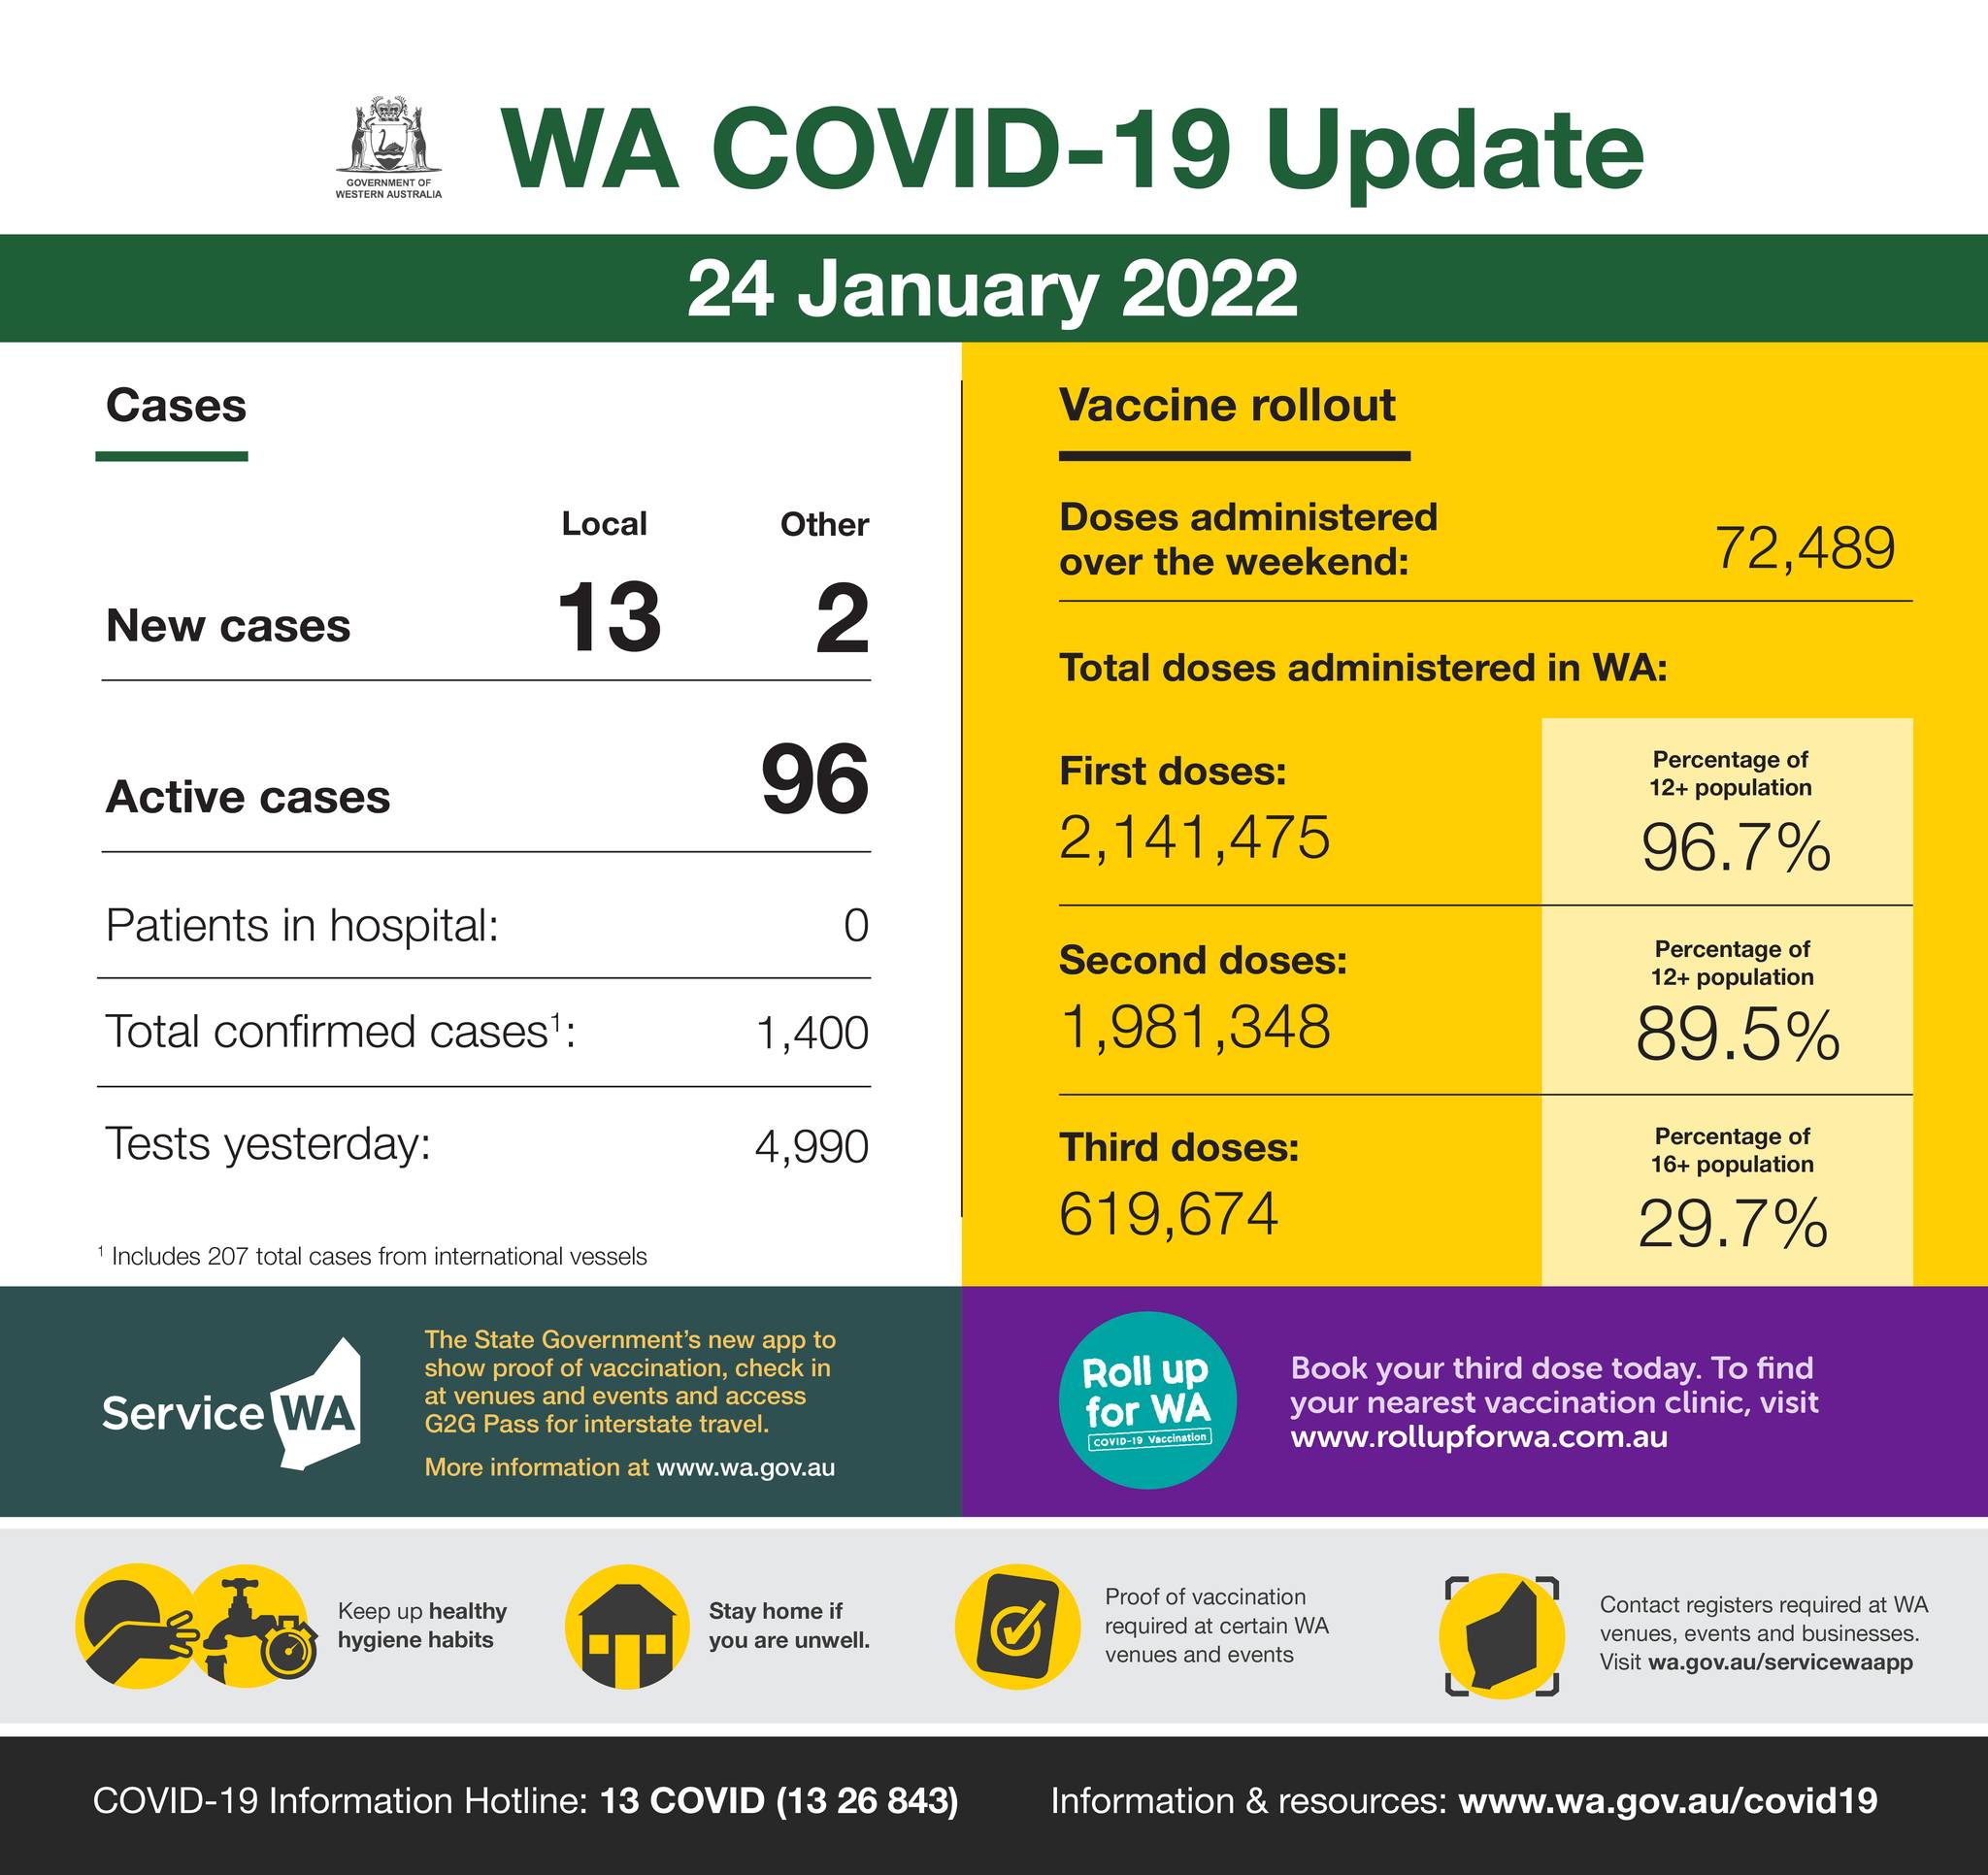 May be an image of text that says 'ÛE Cases WA COVID-19 Update 24 January 2022 Local Vaccine rollout New cases 13 Doses administered over the weekend: 2 Active cases 72,489 Total doses administered in WA: 96 Patients in hospital: First doses: 2,141,475 0 Total confirmed cases1: Percentage 2+population 96.7% 1,400 Tests yesterday: Second doses: 1,981,348 1Inclu P”g 4,990 cases from international vessels 89.5% Third doses: 619,674 Service WA +population 29.7% Rollu WA Keepu Book third dose today. find your clinic, visit www.rollupforwa.com.au healthy habits Stay home you unwell. vaccinati venues events COVID 19 Information Hotline: 13 COVID (13 26 843) Contact venues, wa.gov.au/servicewaapp Information resources: www.wa.gov.au/covid19'